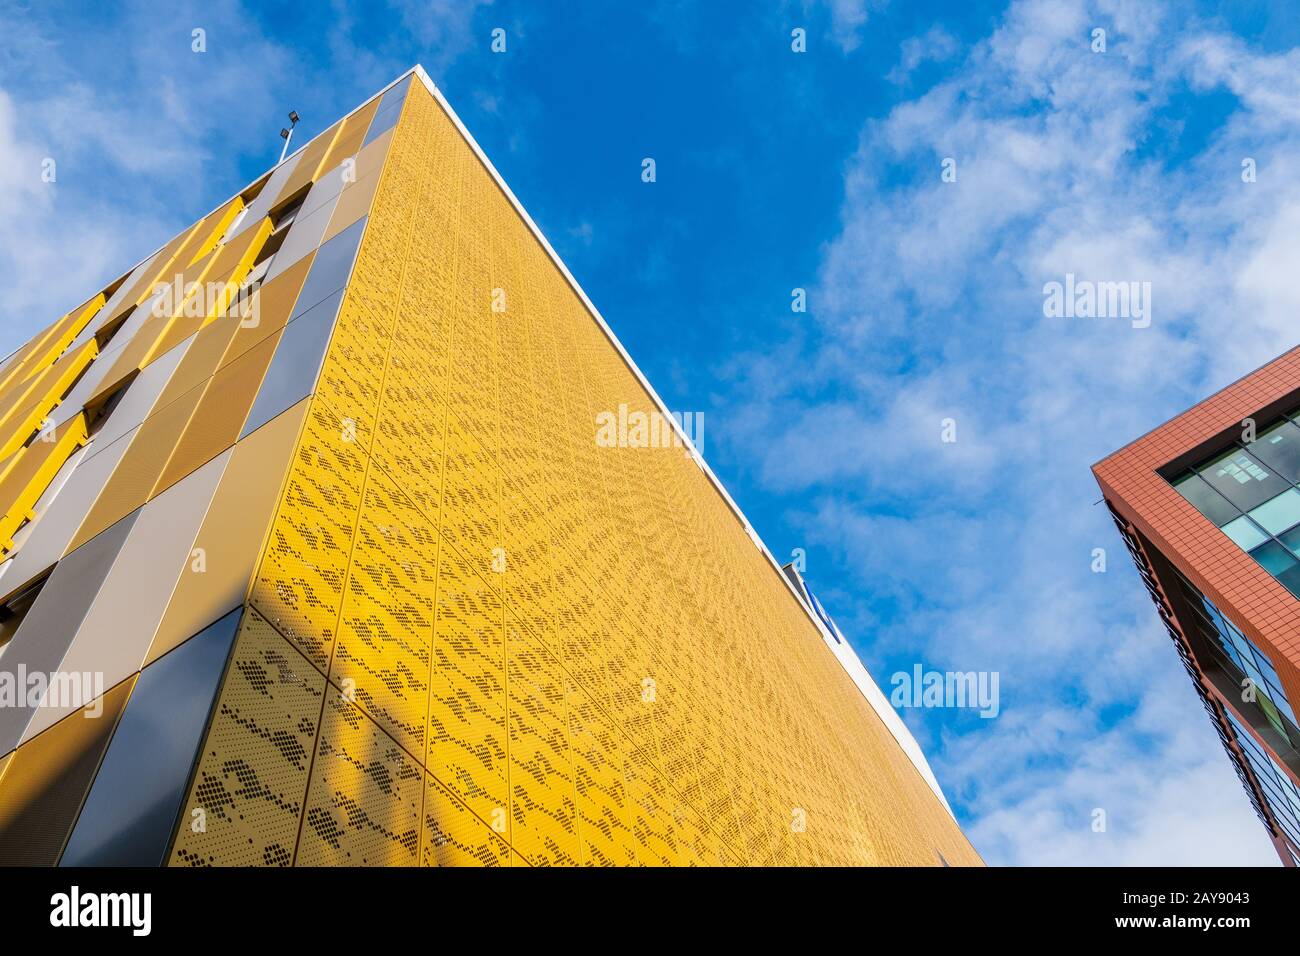 Contrasting colors and shapes on building facades against the sky in Manchester, UK Stock Photo